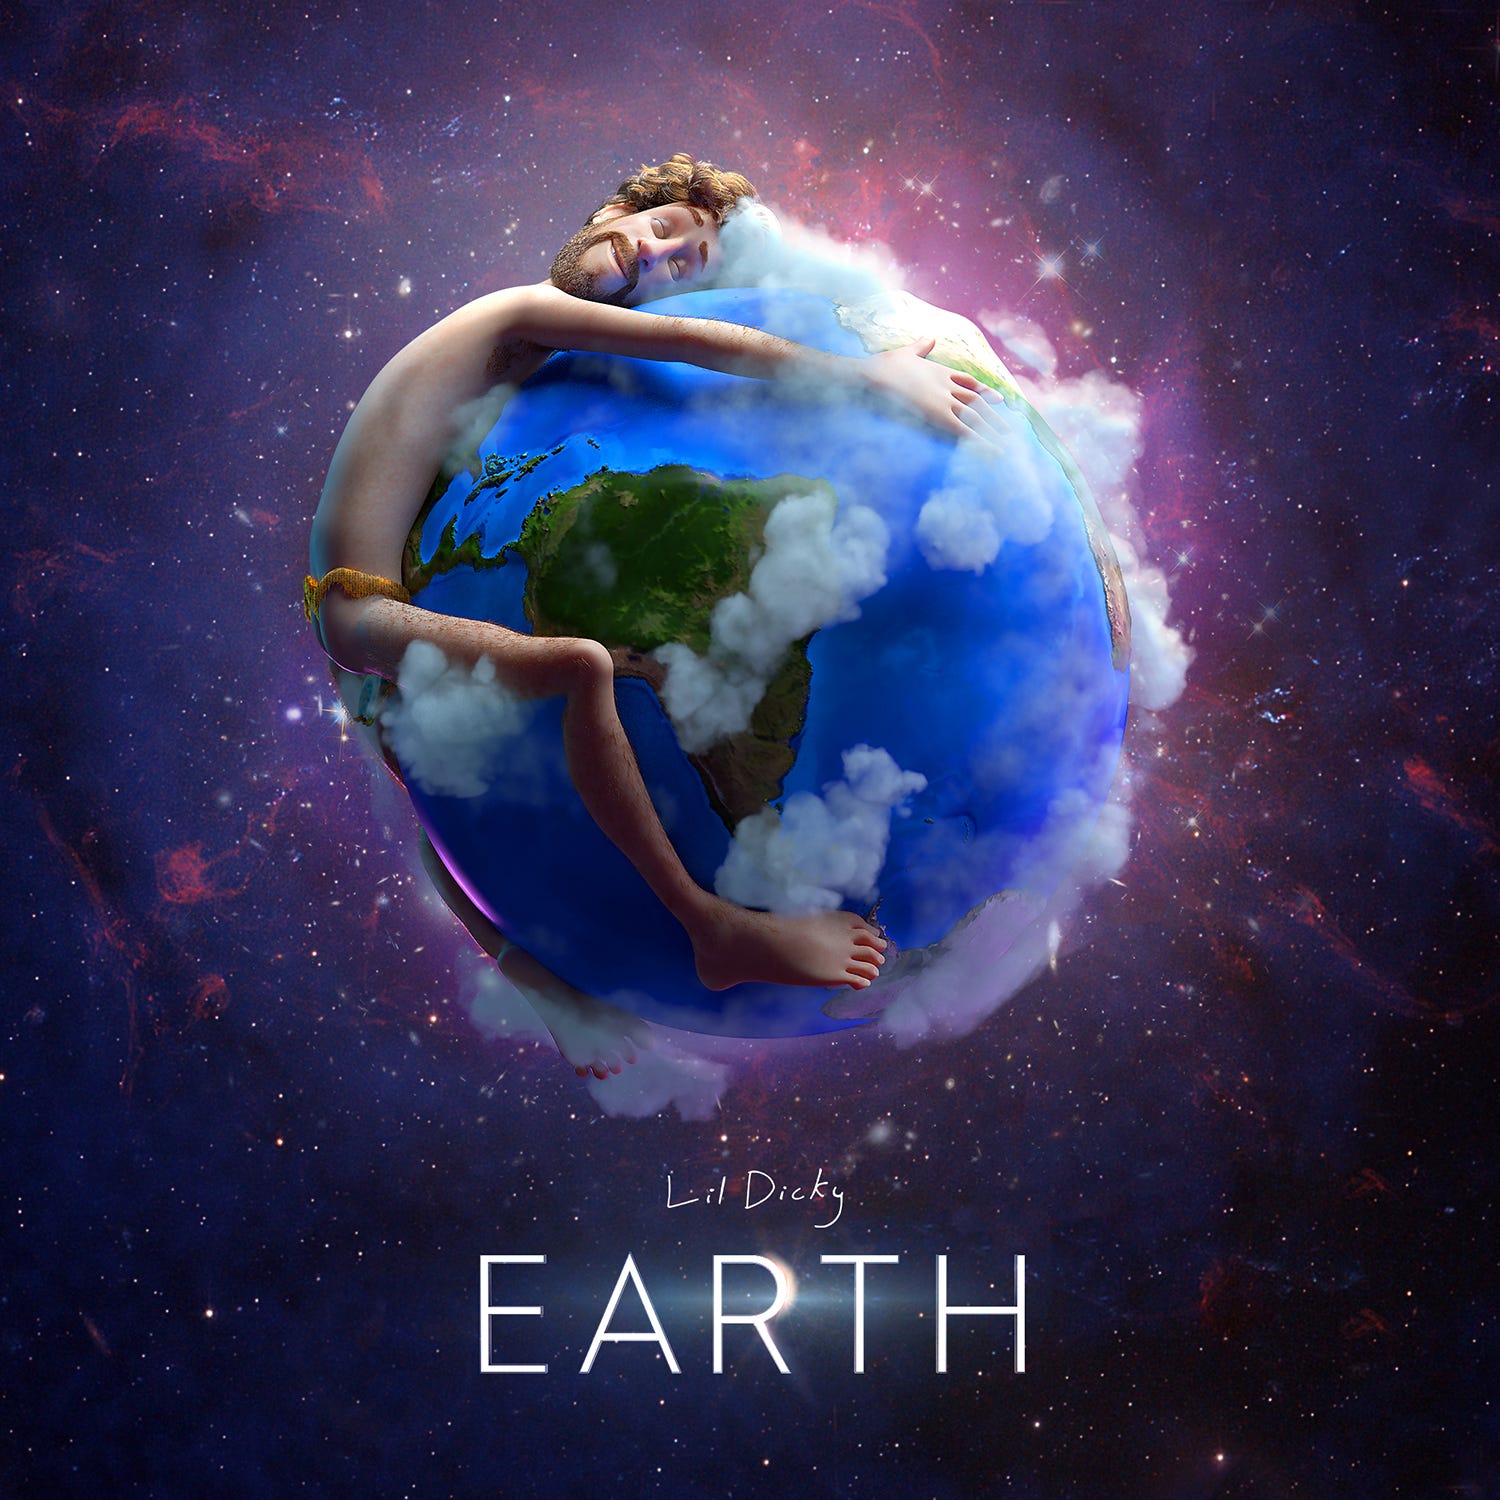 Justin Bieber, Miley Cyrus get animated in 'Earth' video